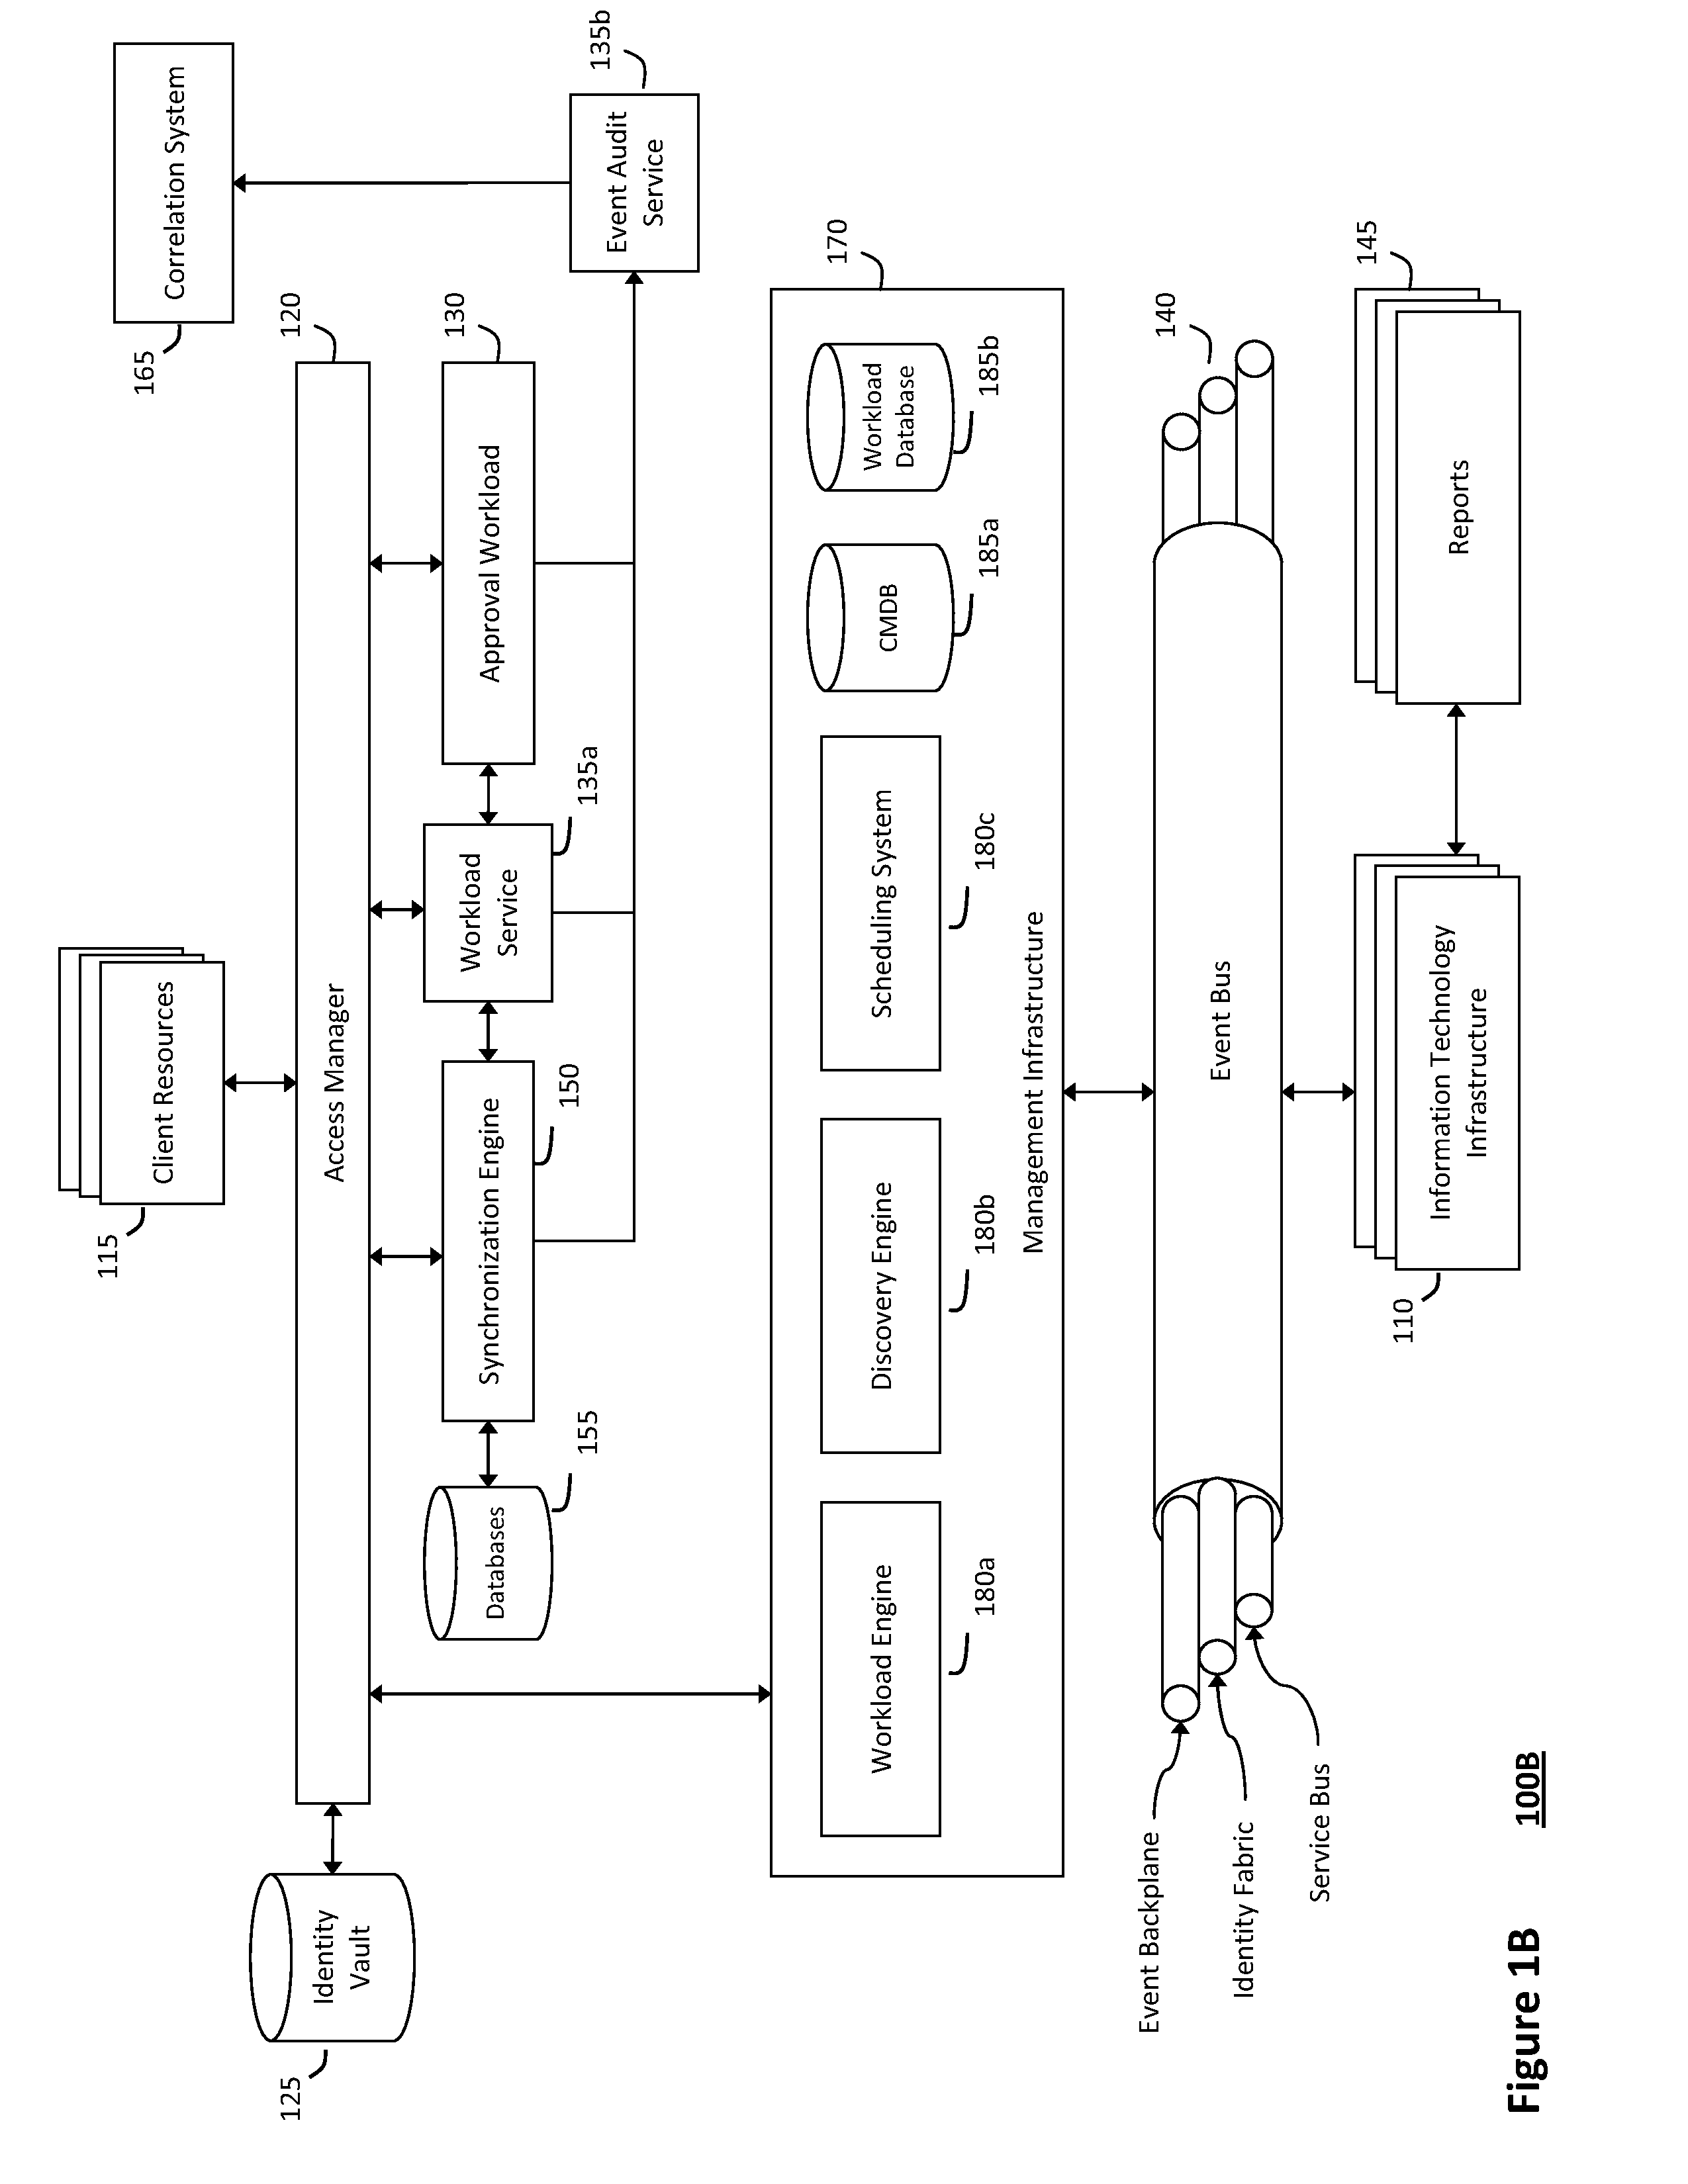 System and method for providing scorecards to visualize services in an intelligent workload management system